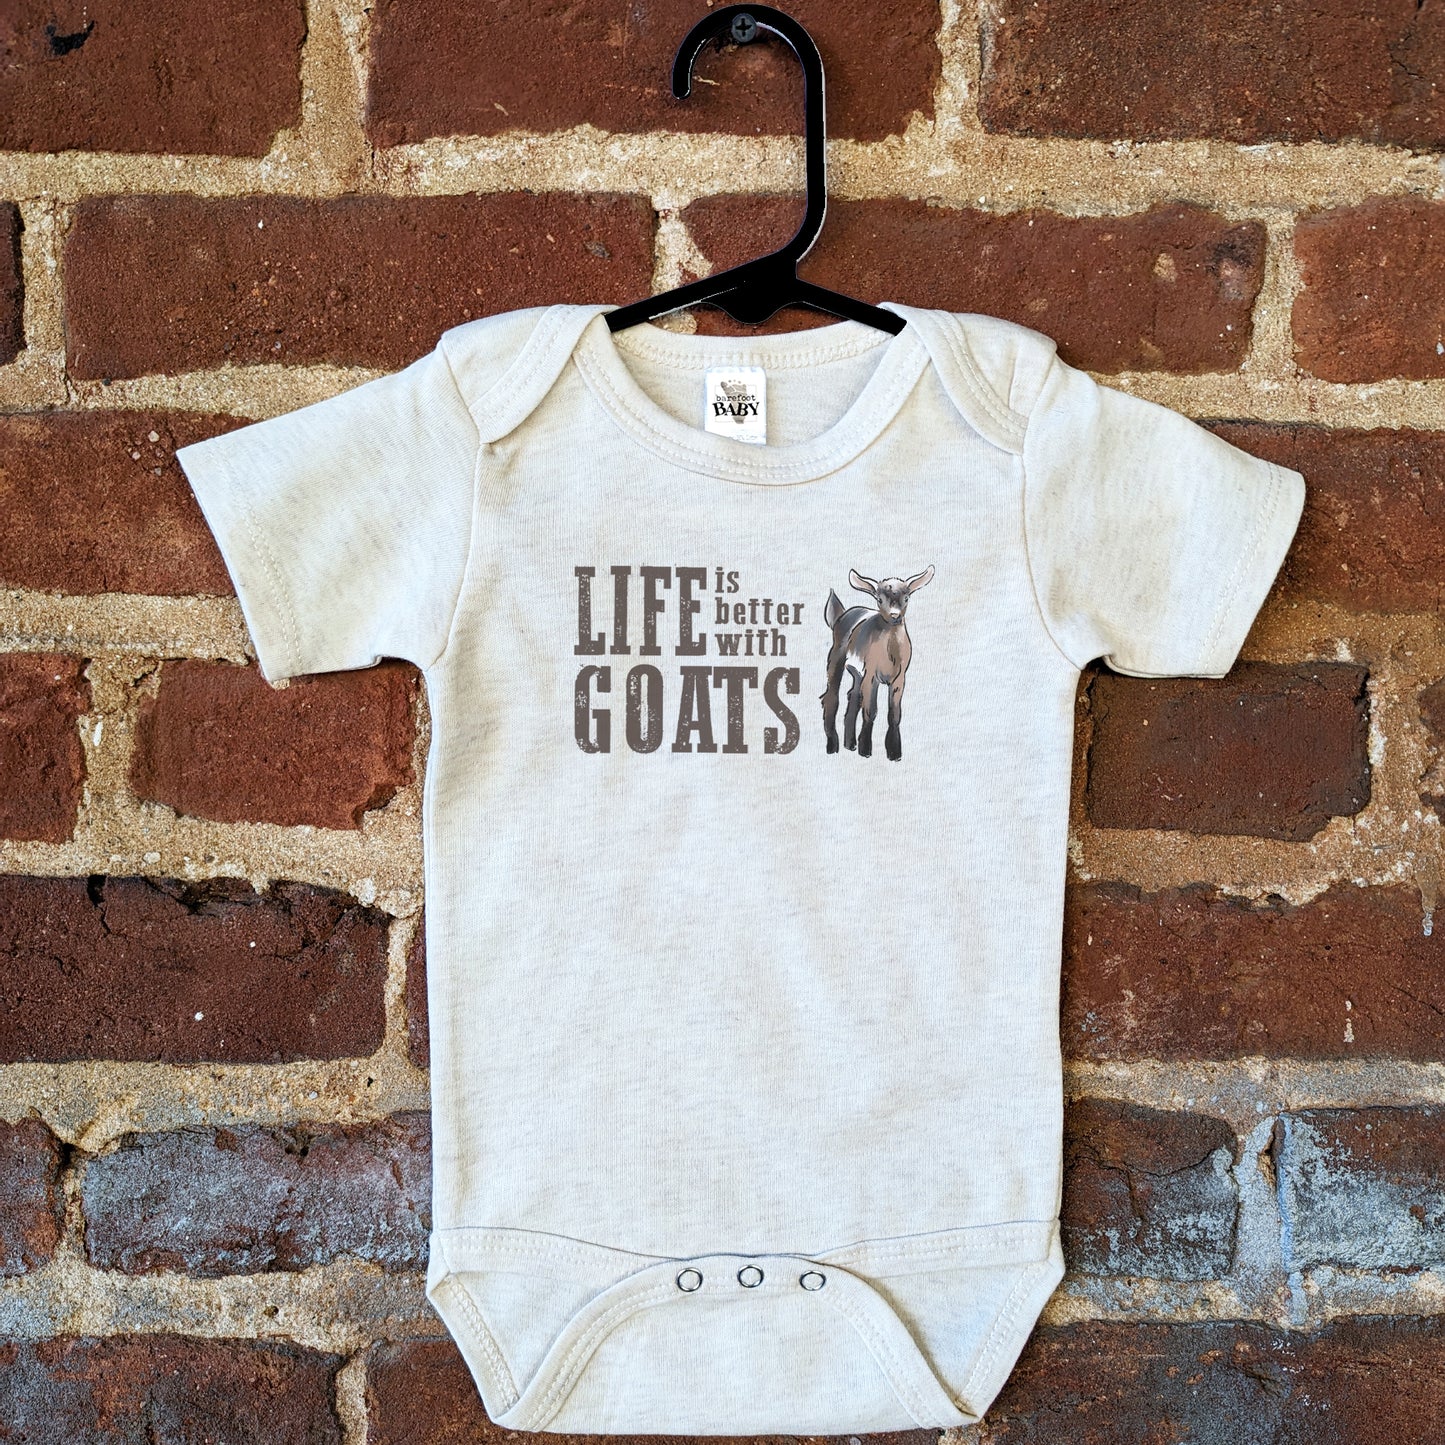 Nubian GOAT "Life is better with goats" Beige Baby Body Suit